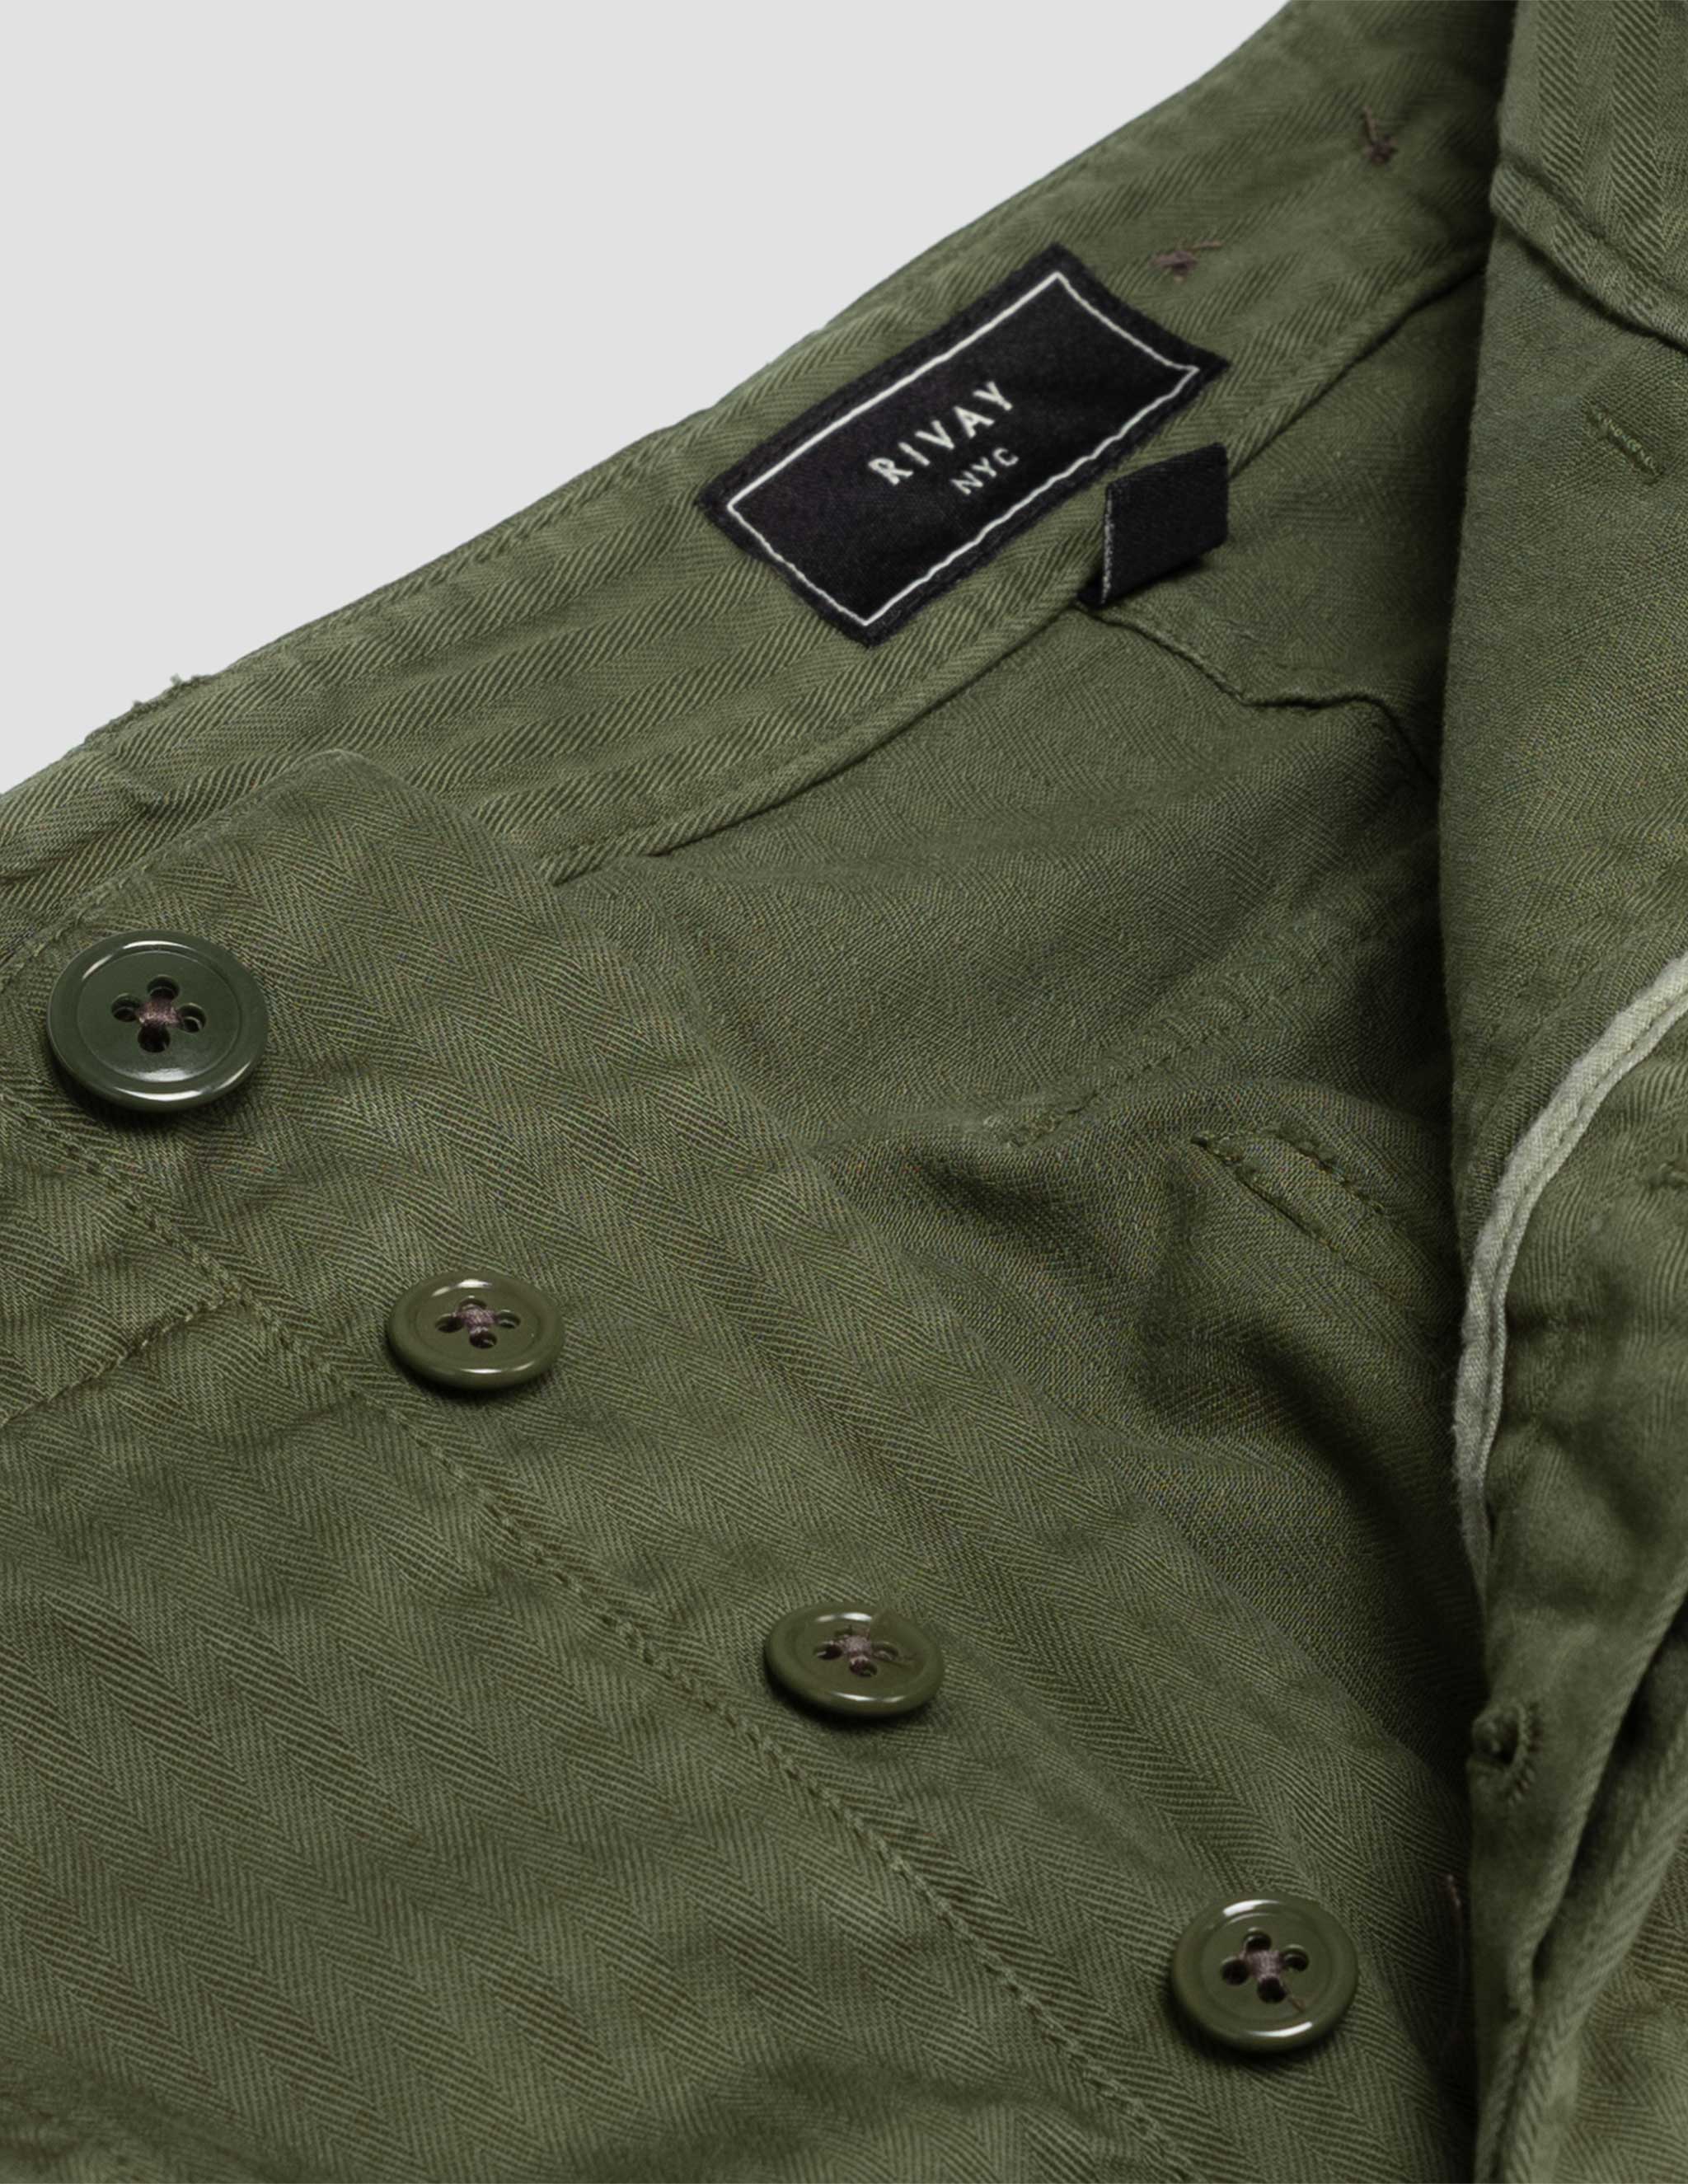 Series II Garment Dyed Utility Pant in Olive Drab